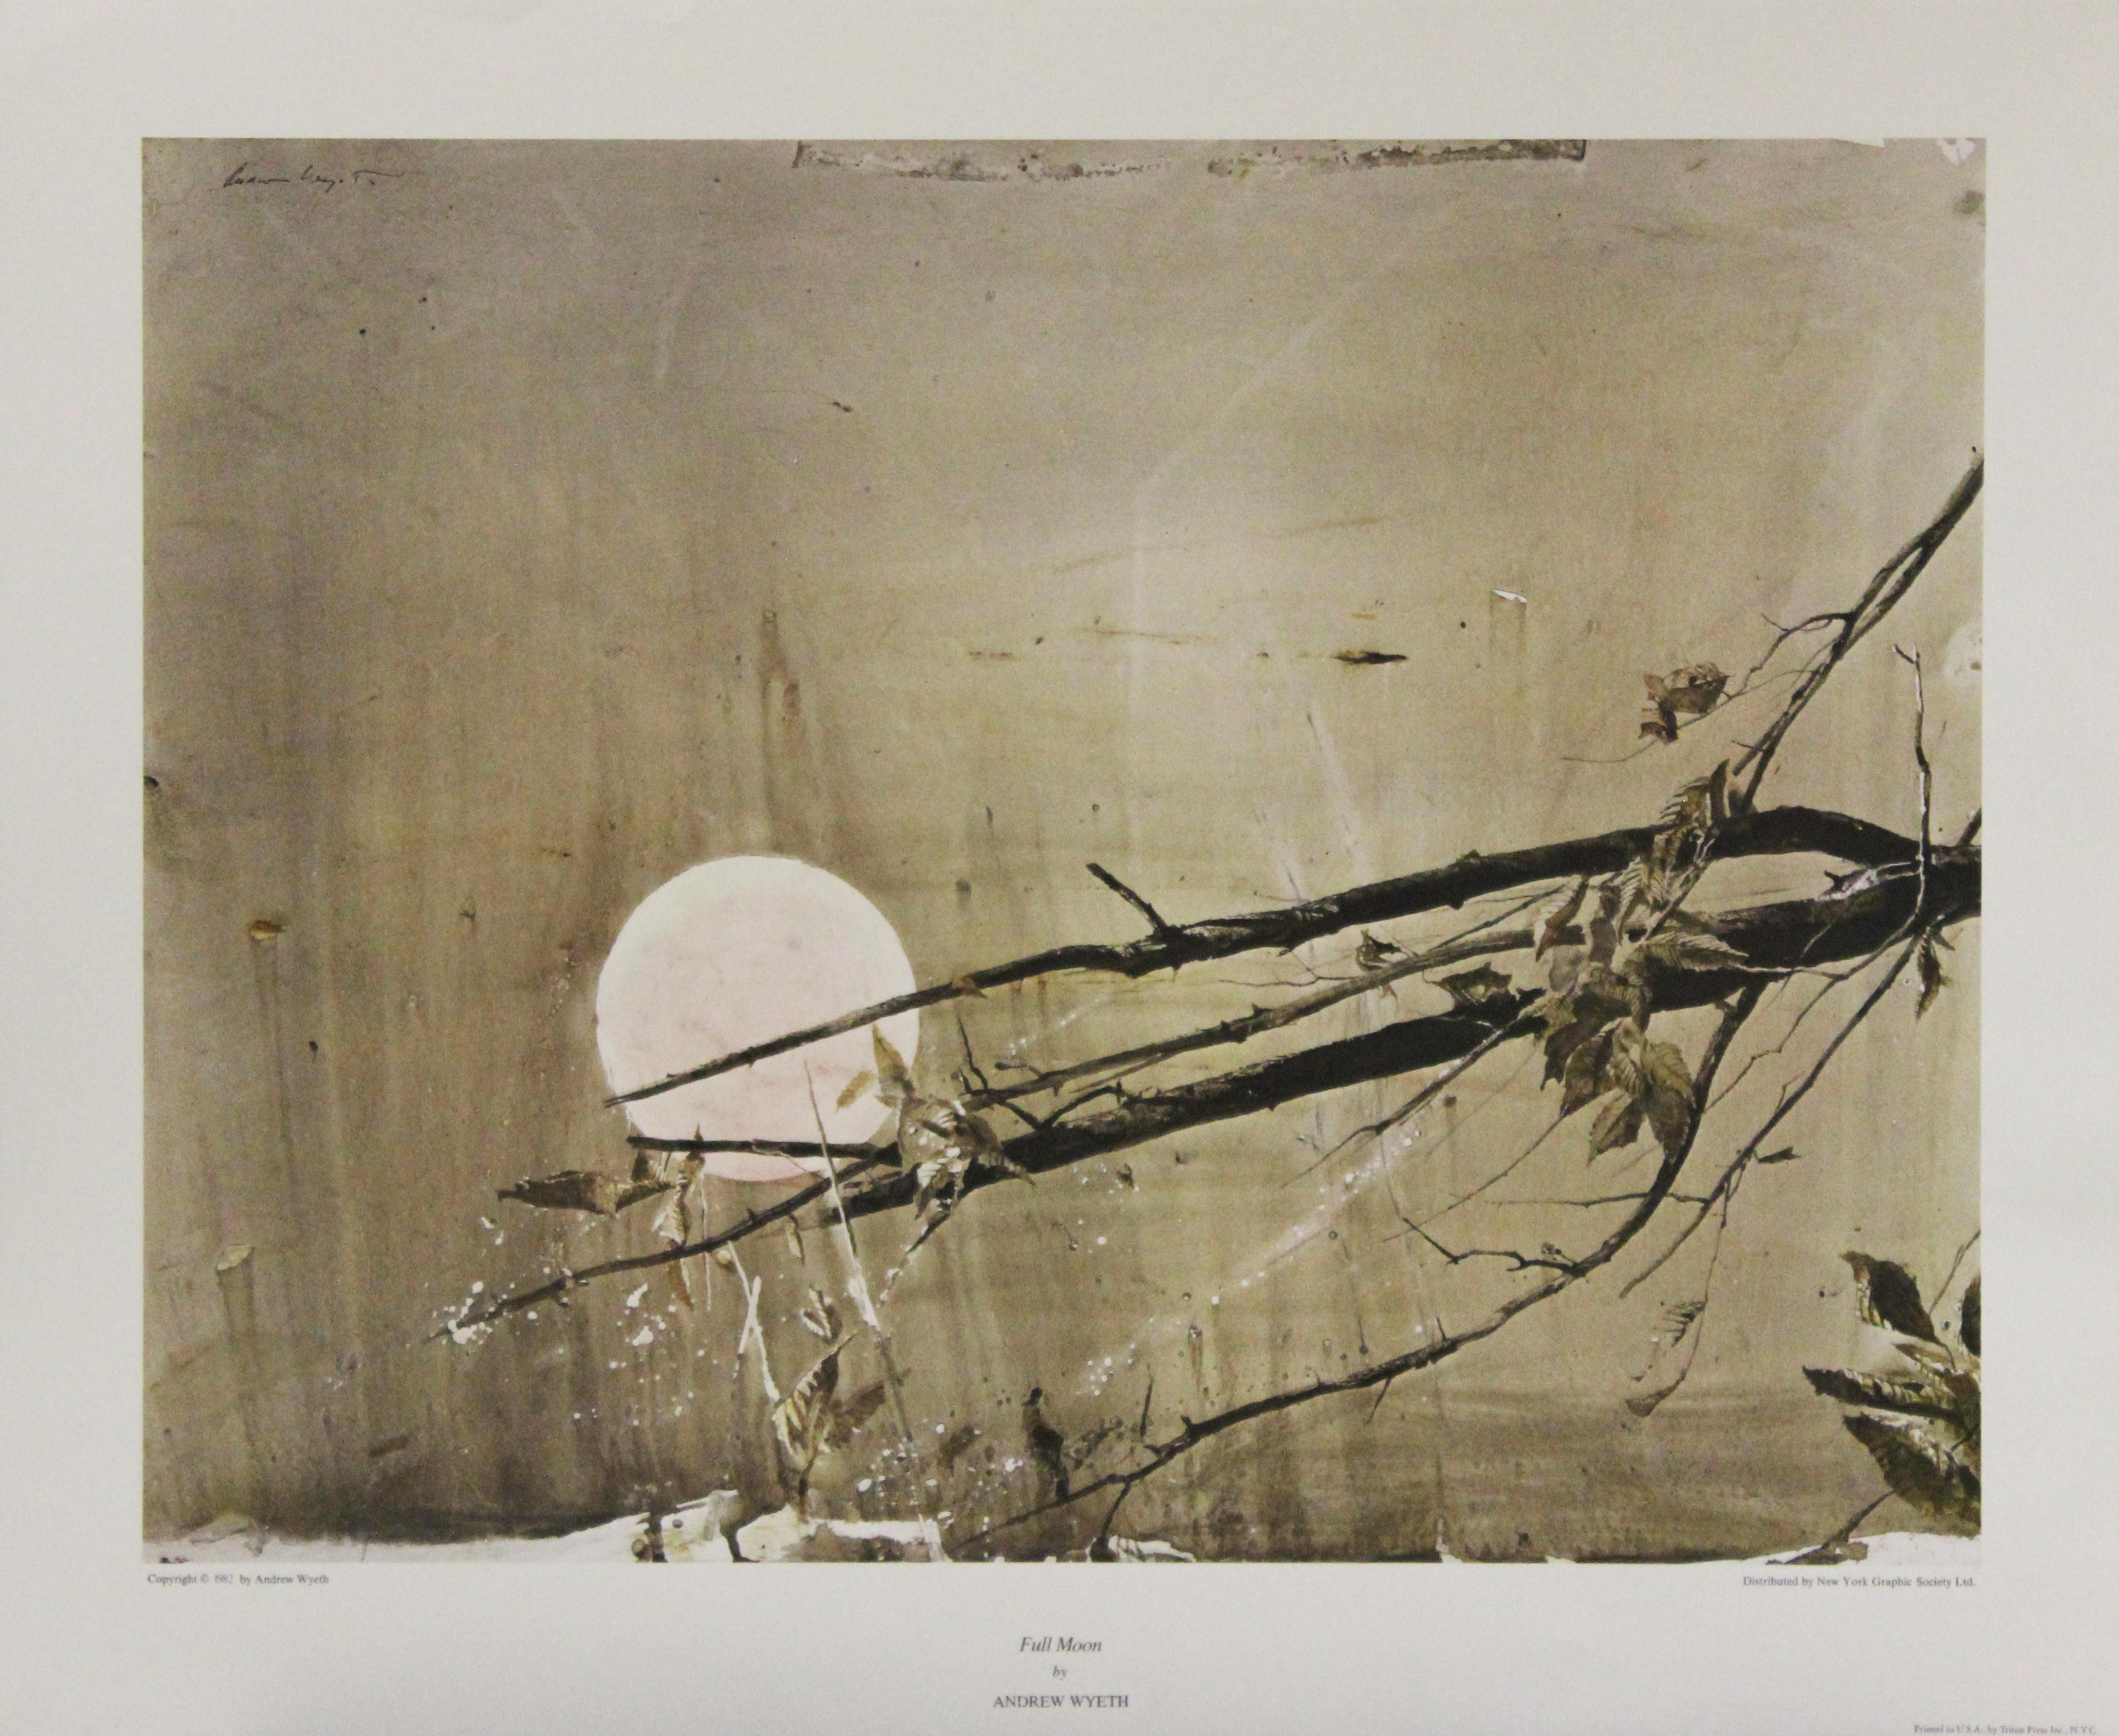 (after) Andrew Wyeth Landscape Print - Full Moon-Poster. New York Graphic Society, Ltd. 